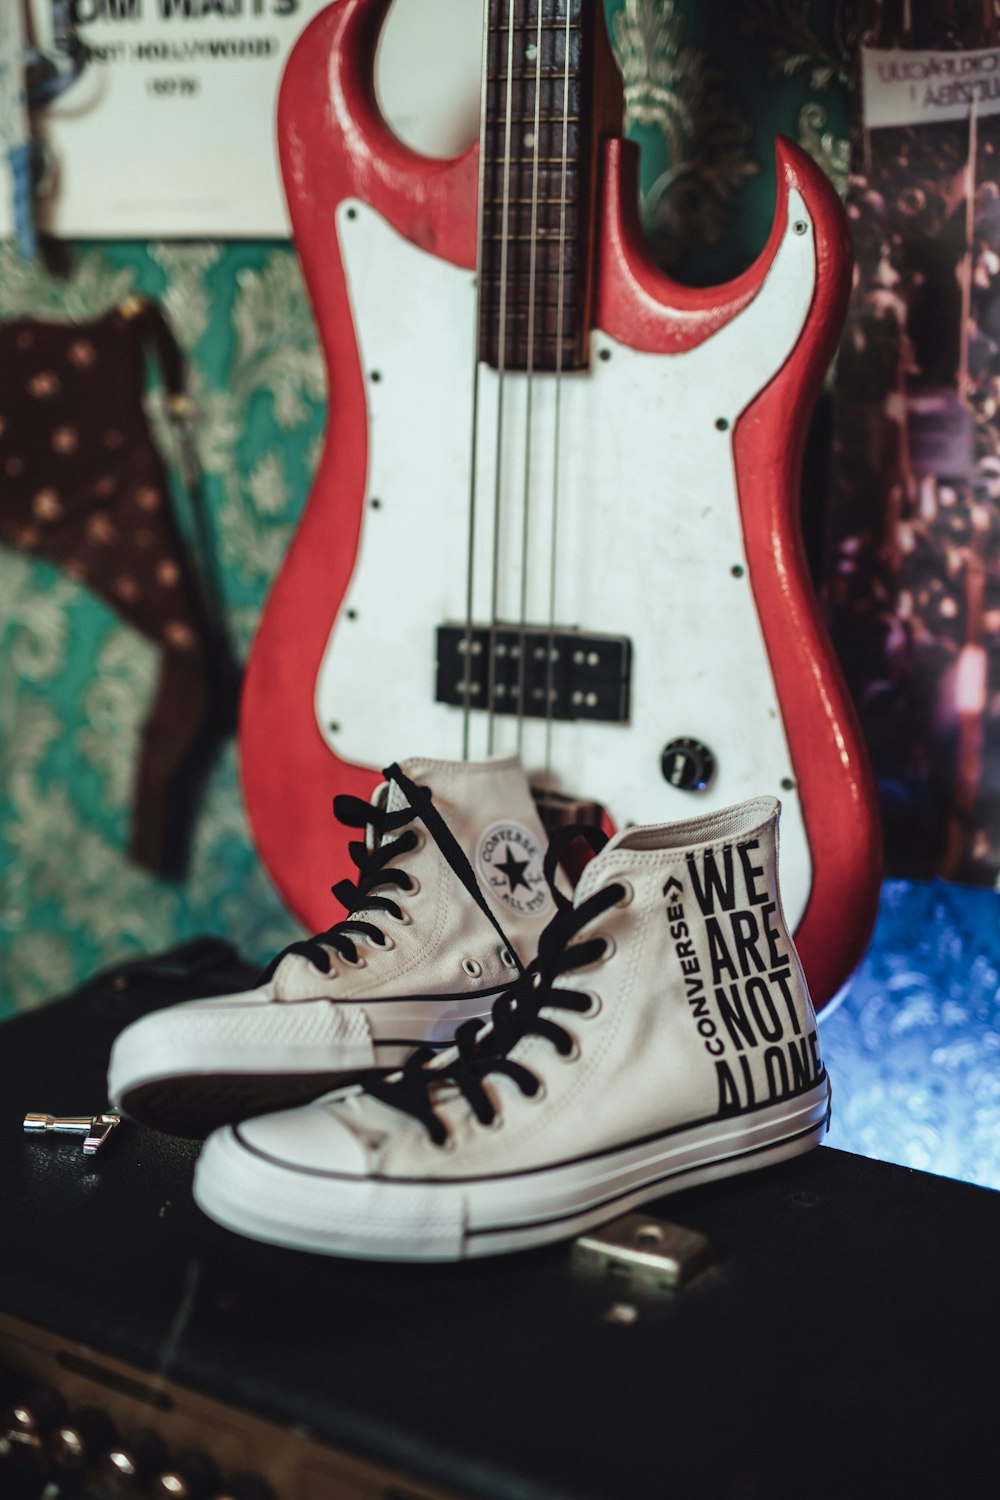 pair of white high-top sneakers photo – Free Guitar Image on Unsplash